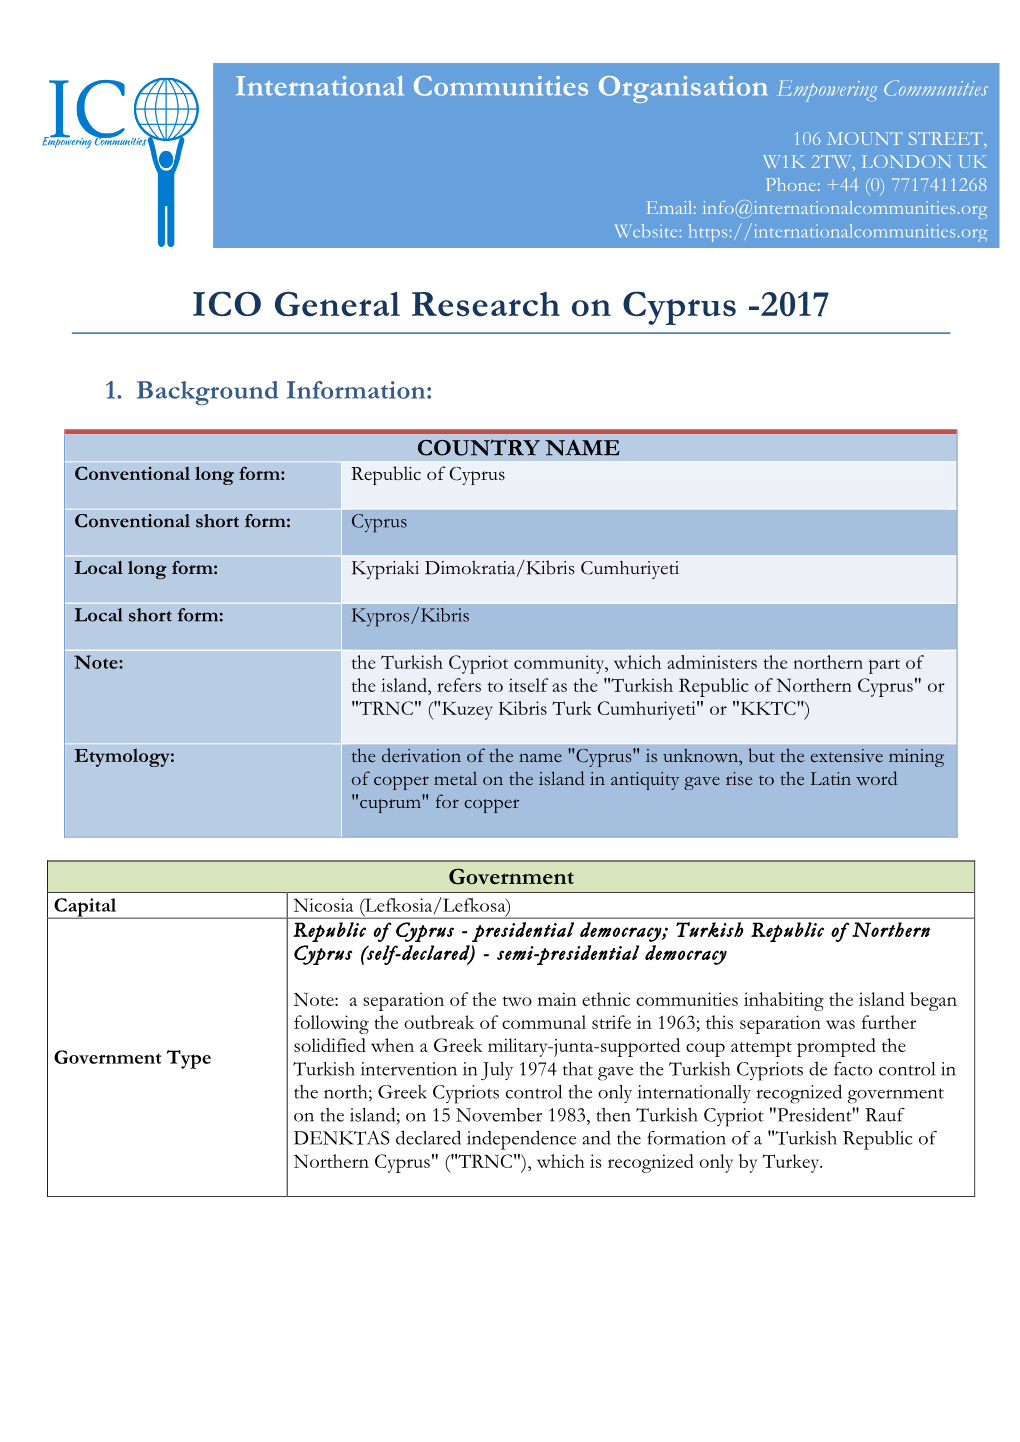 ICO General Research on Cyprus -2017